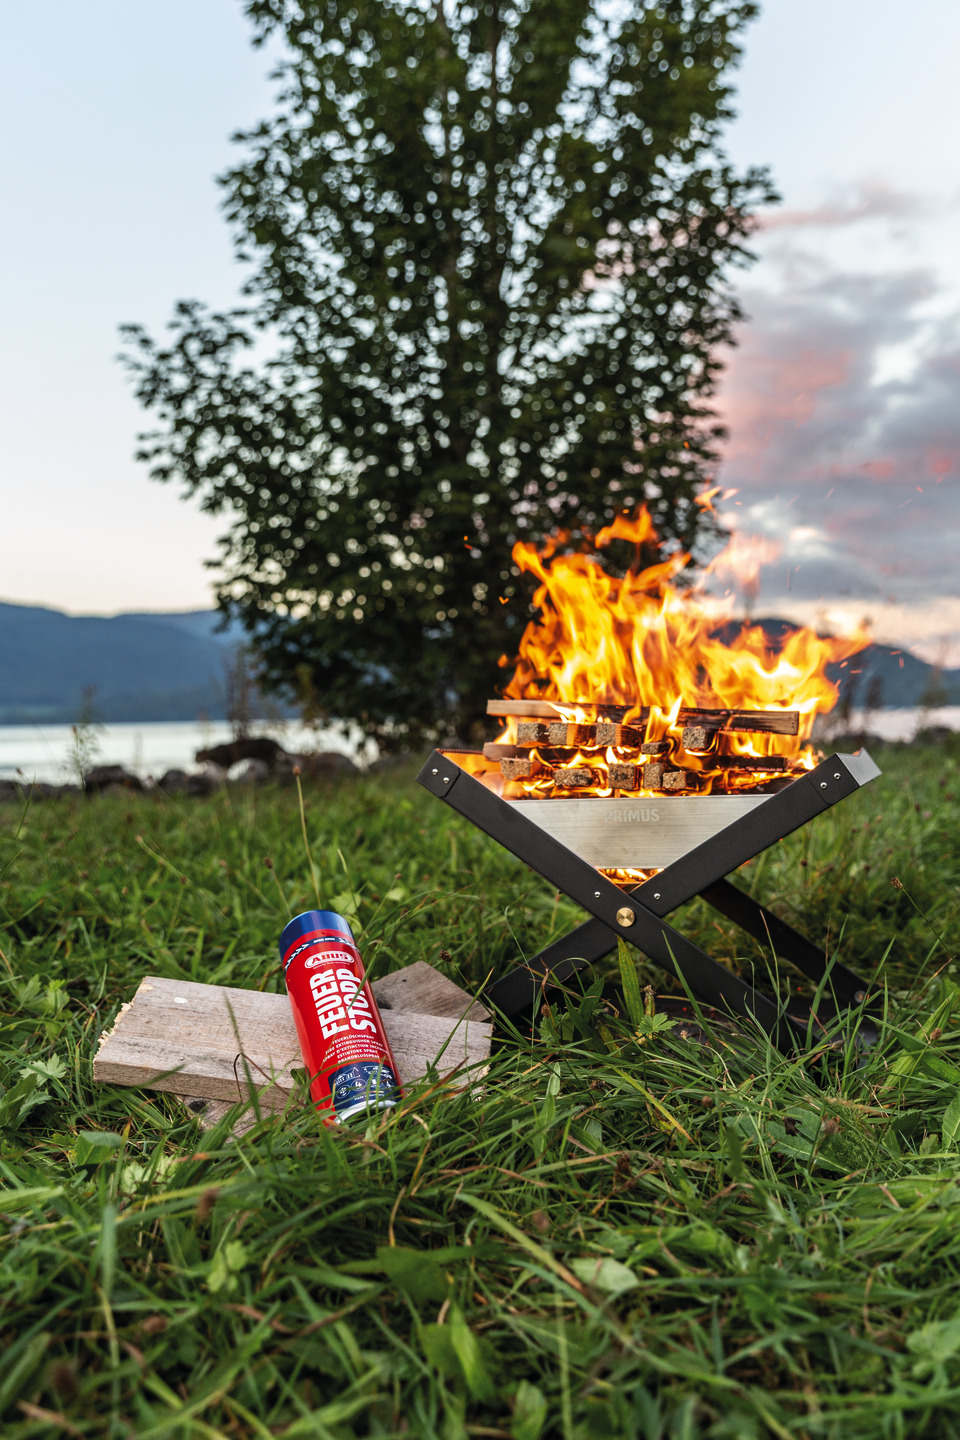 Application example – Fire Extinguisher Spray around the campfire